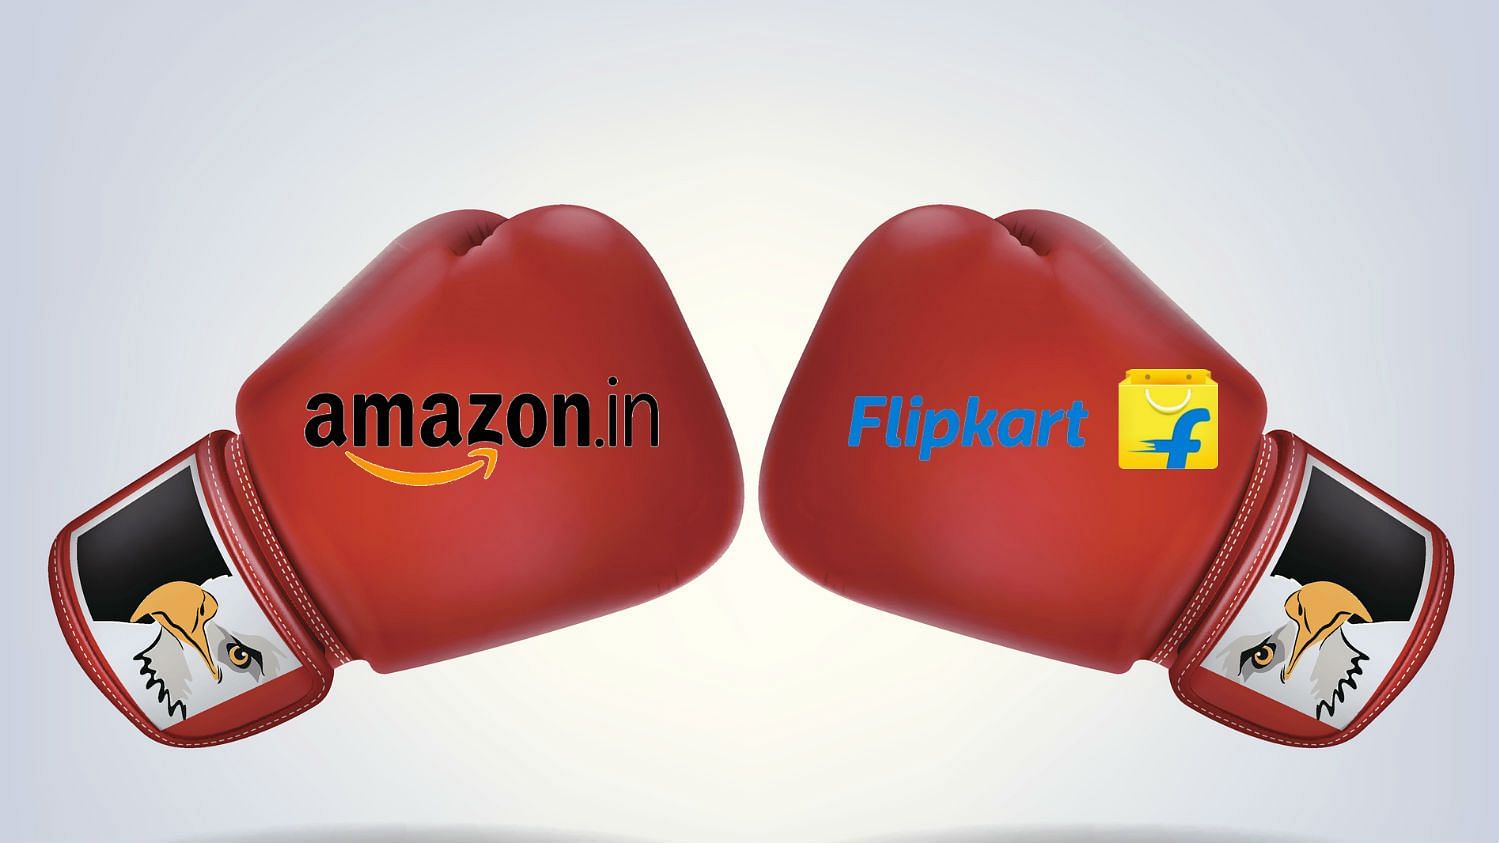 Amazon India has overtaken Flipkart in gross sales for the first time.